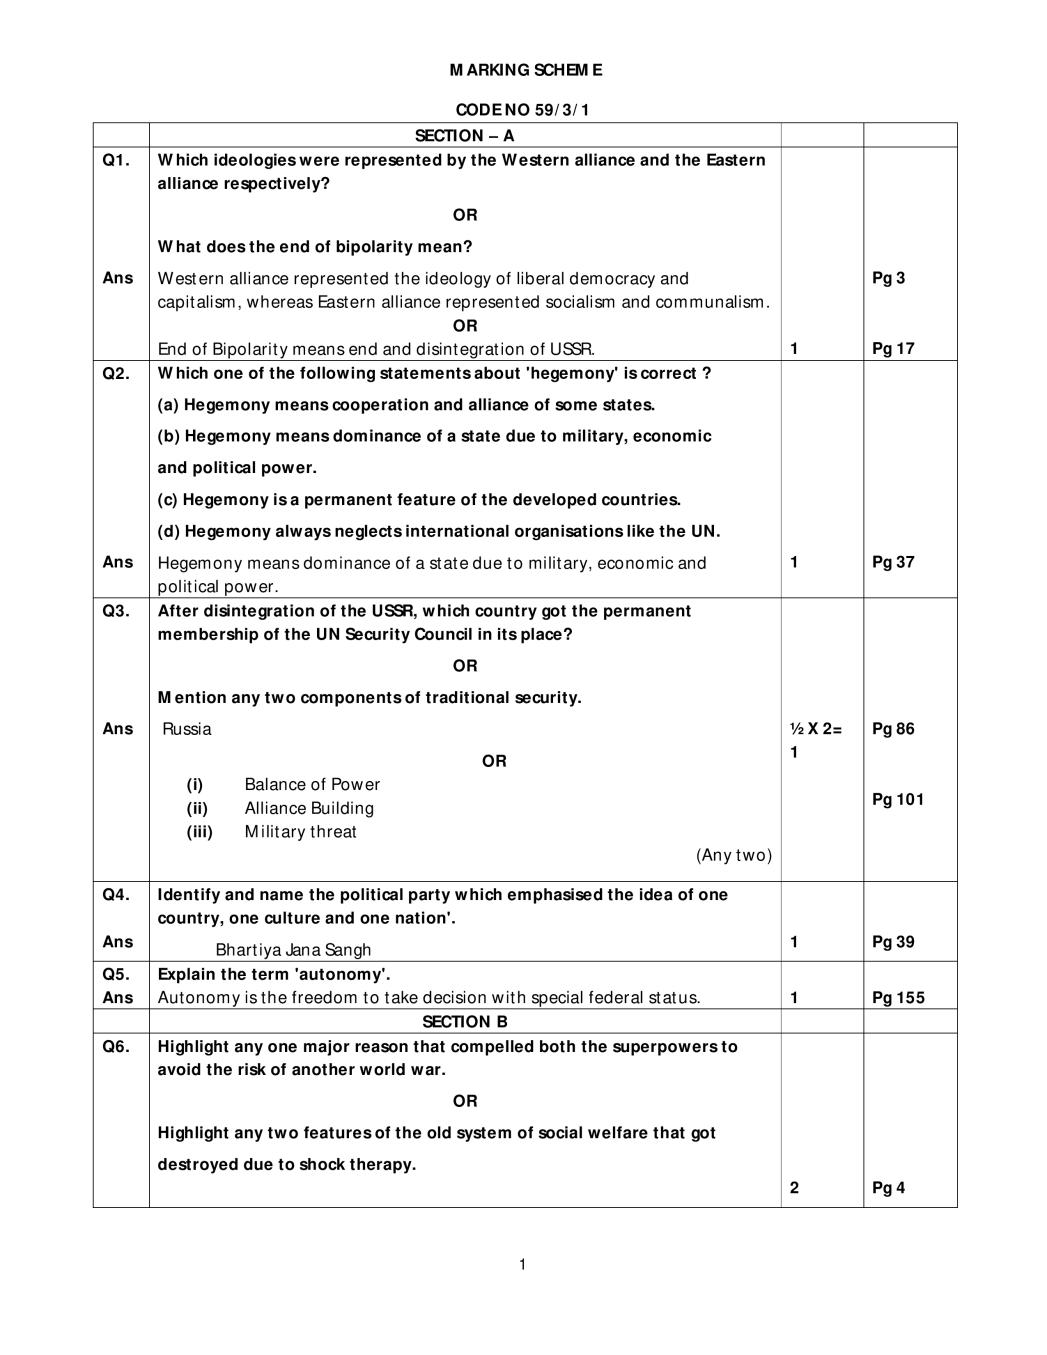 CBSE Class 12 Political Science Question Paper 2019 Set 3 Solutions - Page 1